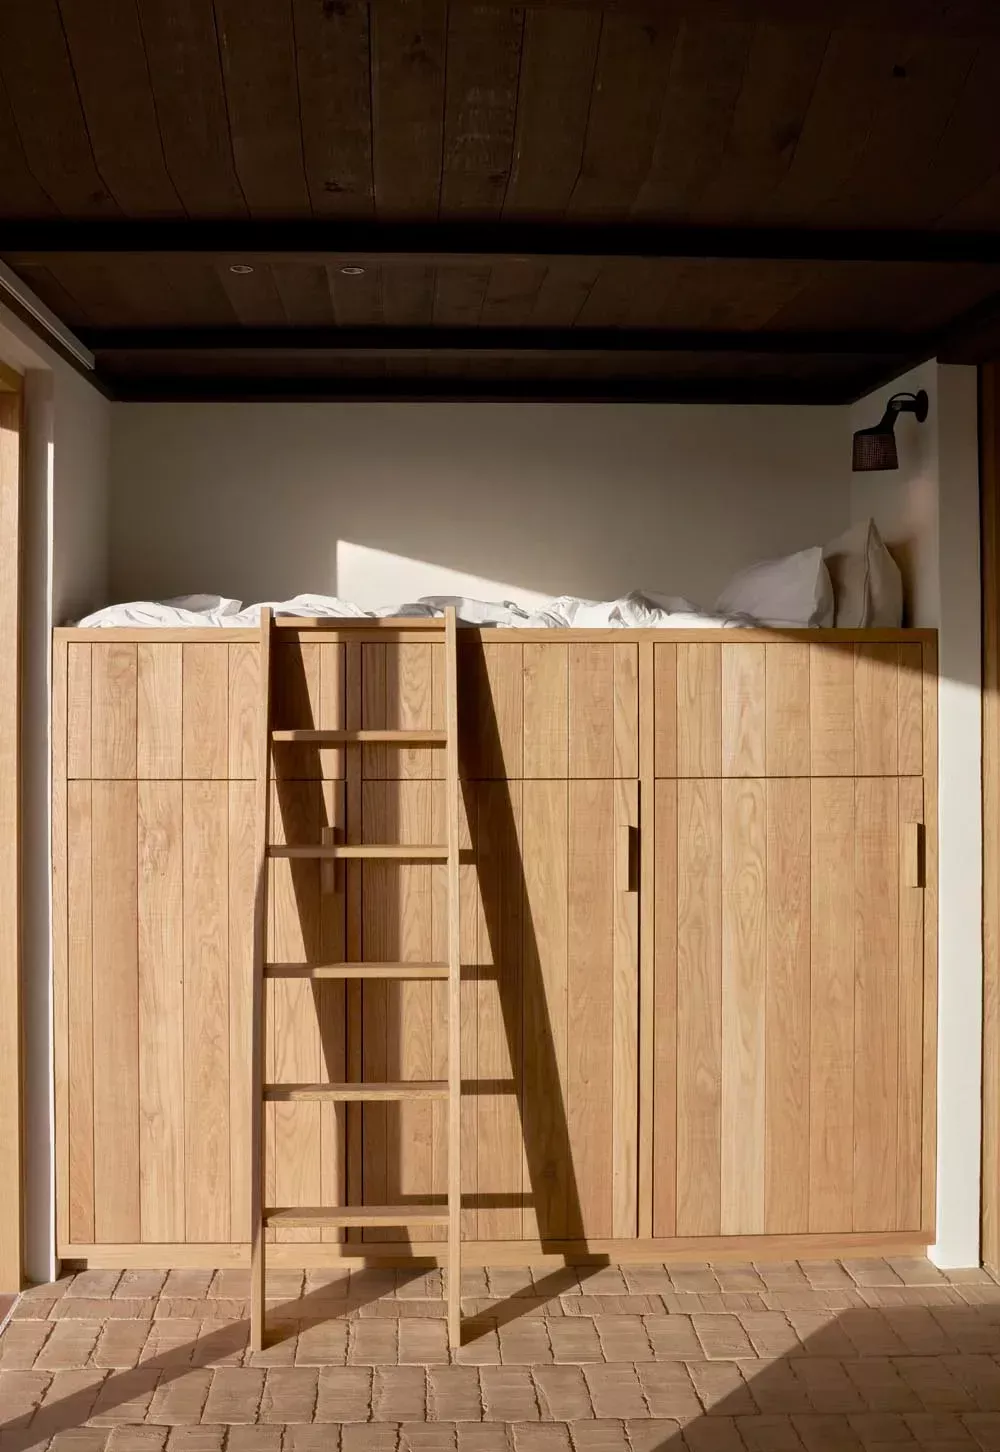 Wall Bed Or Cupboard Bed Benefits of a Space-Saving Sleep Solution